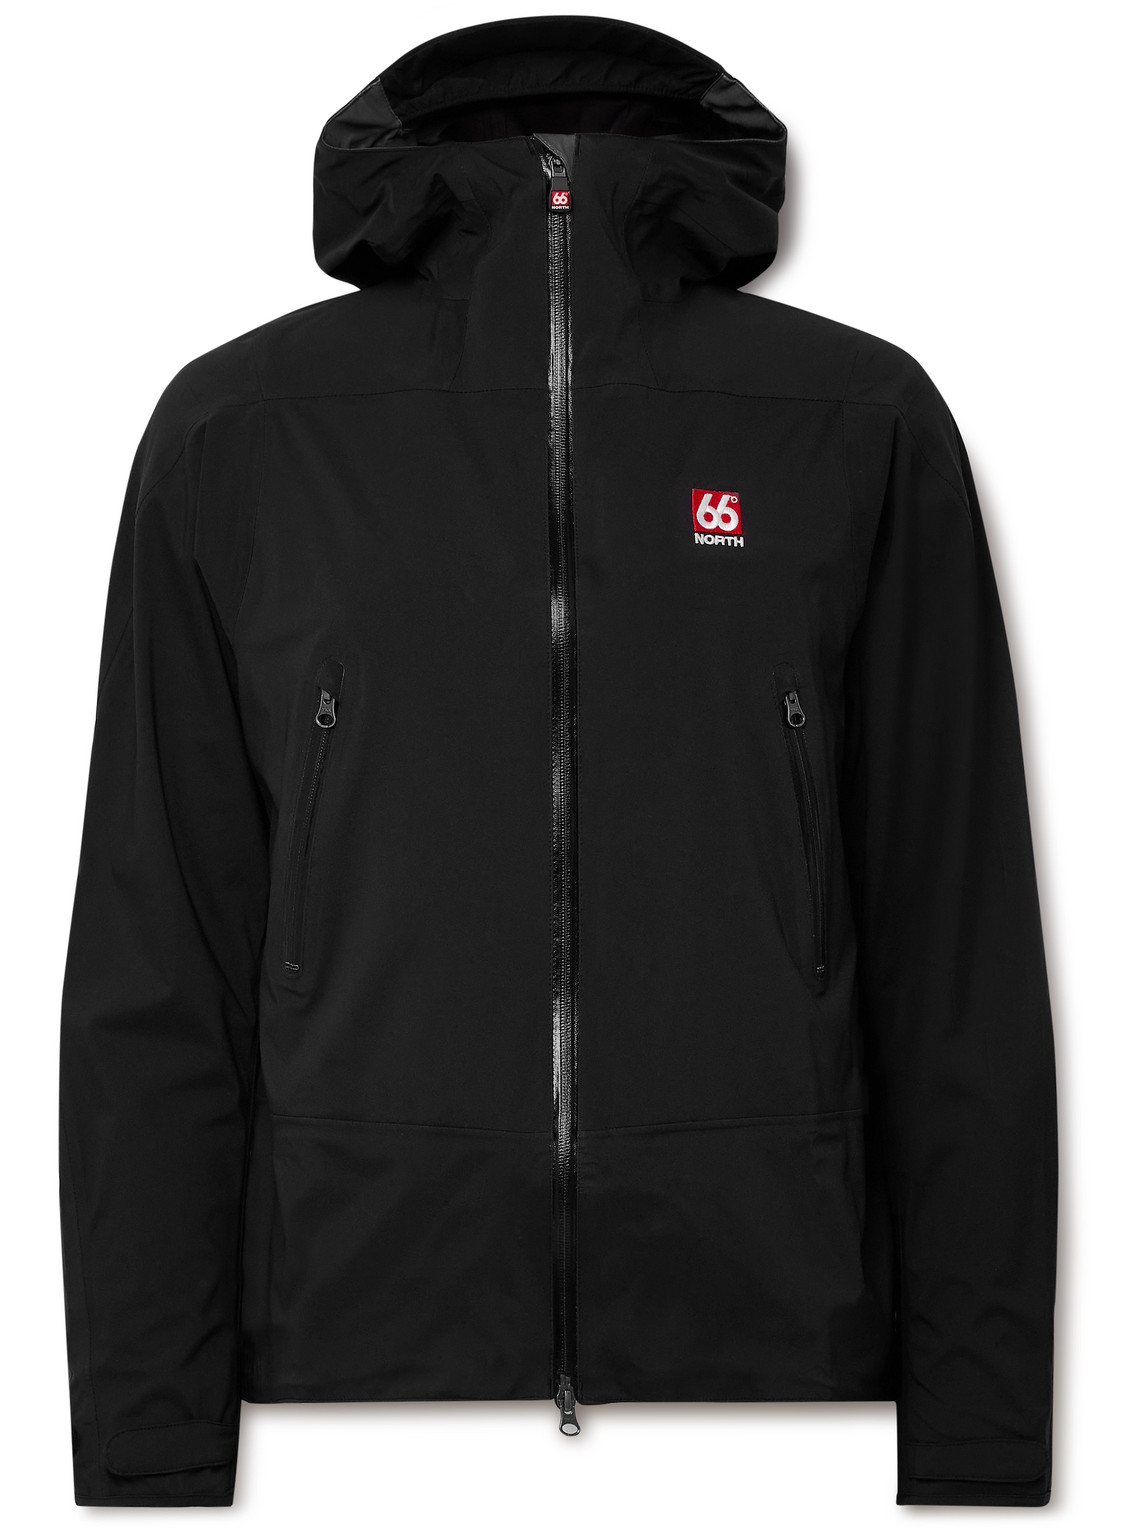 Shop 66 North Snaefell Polartec® Neoshell® Hooded Jacket In Black